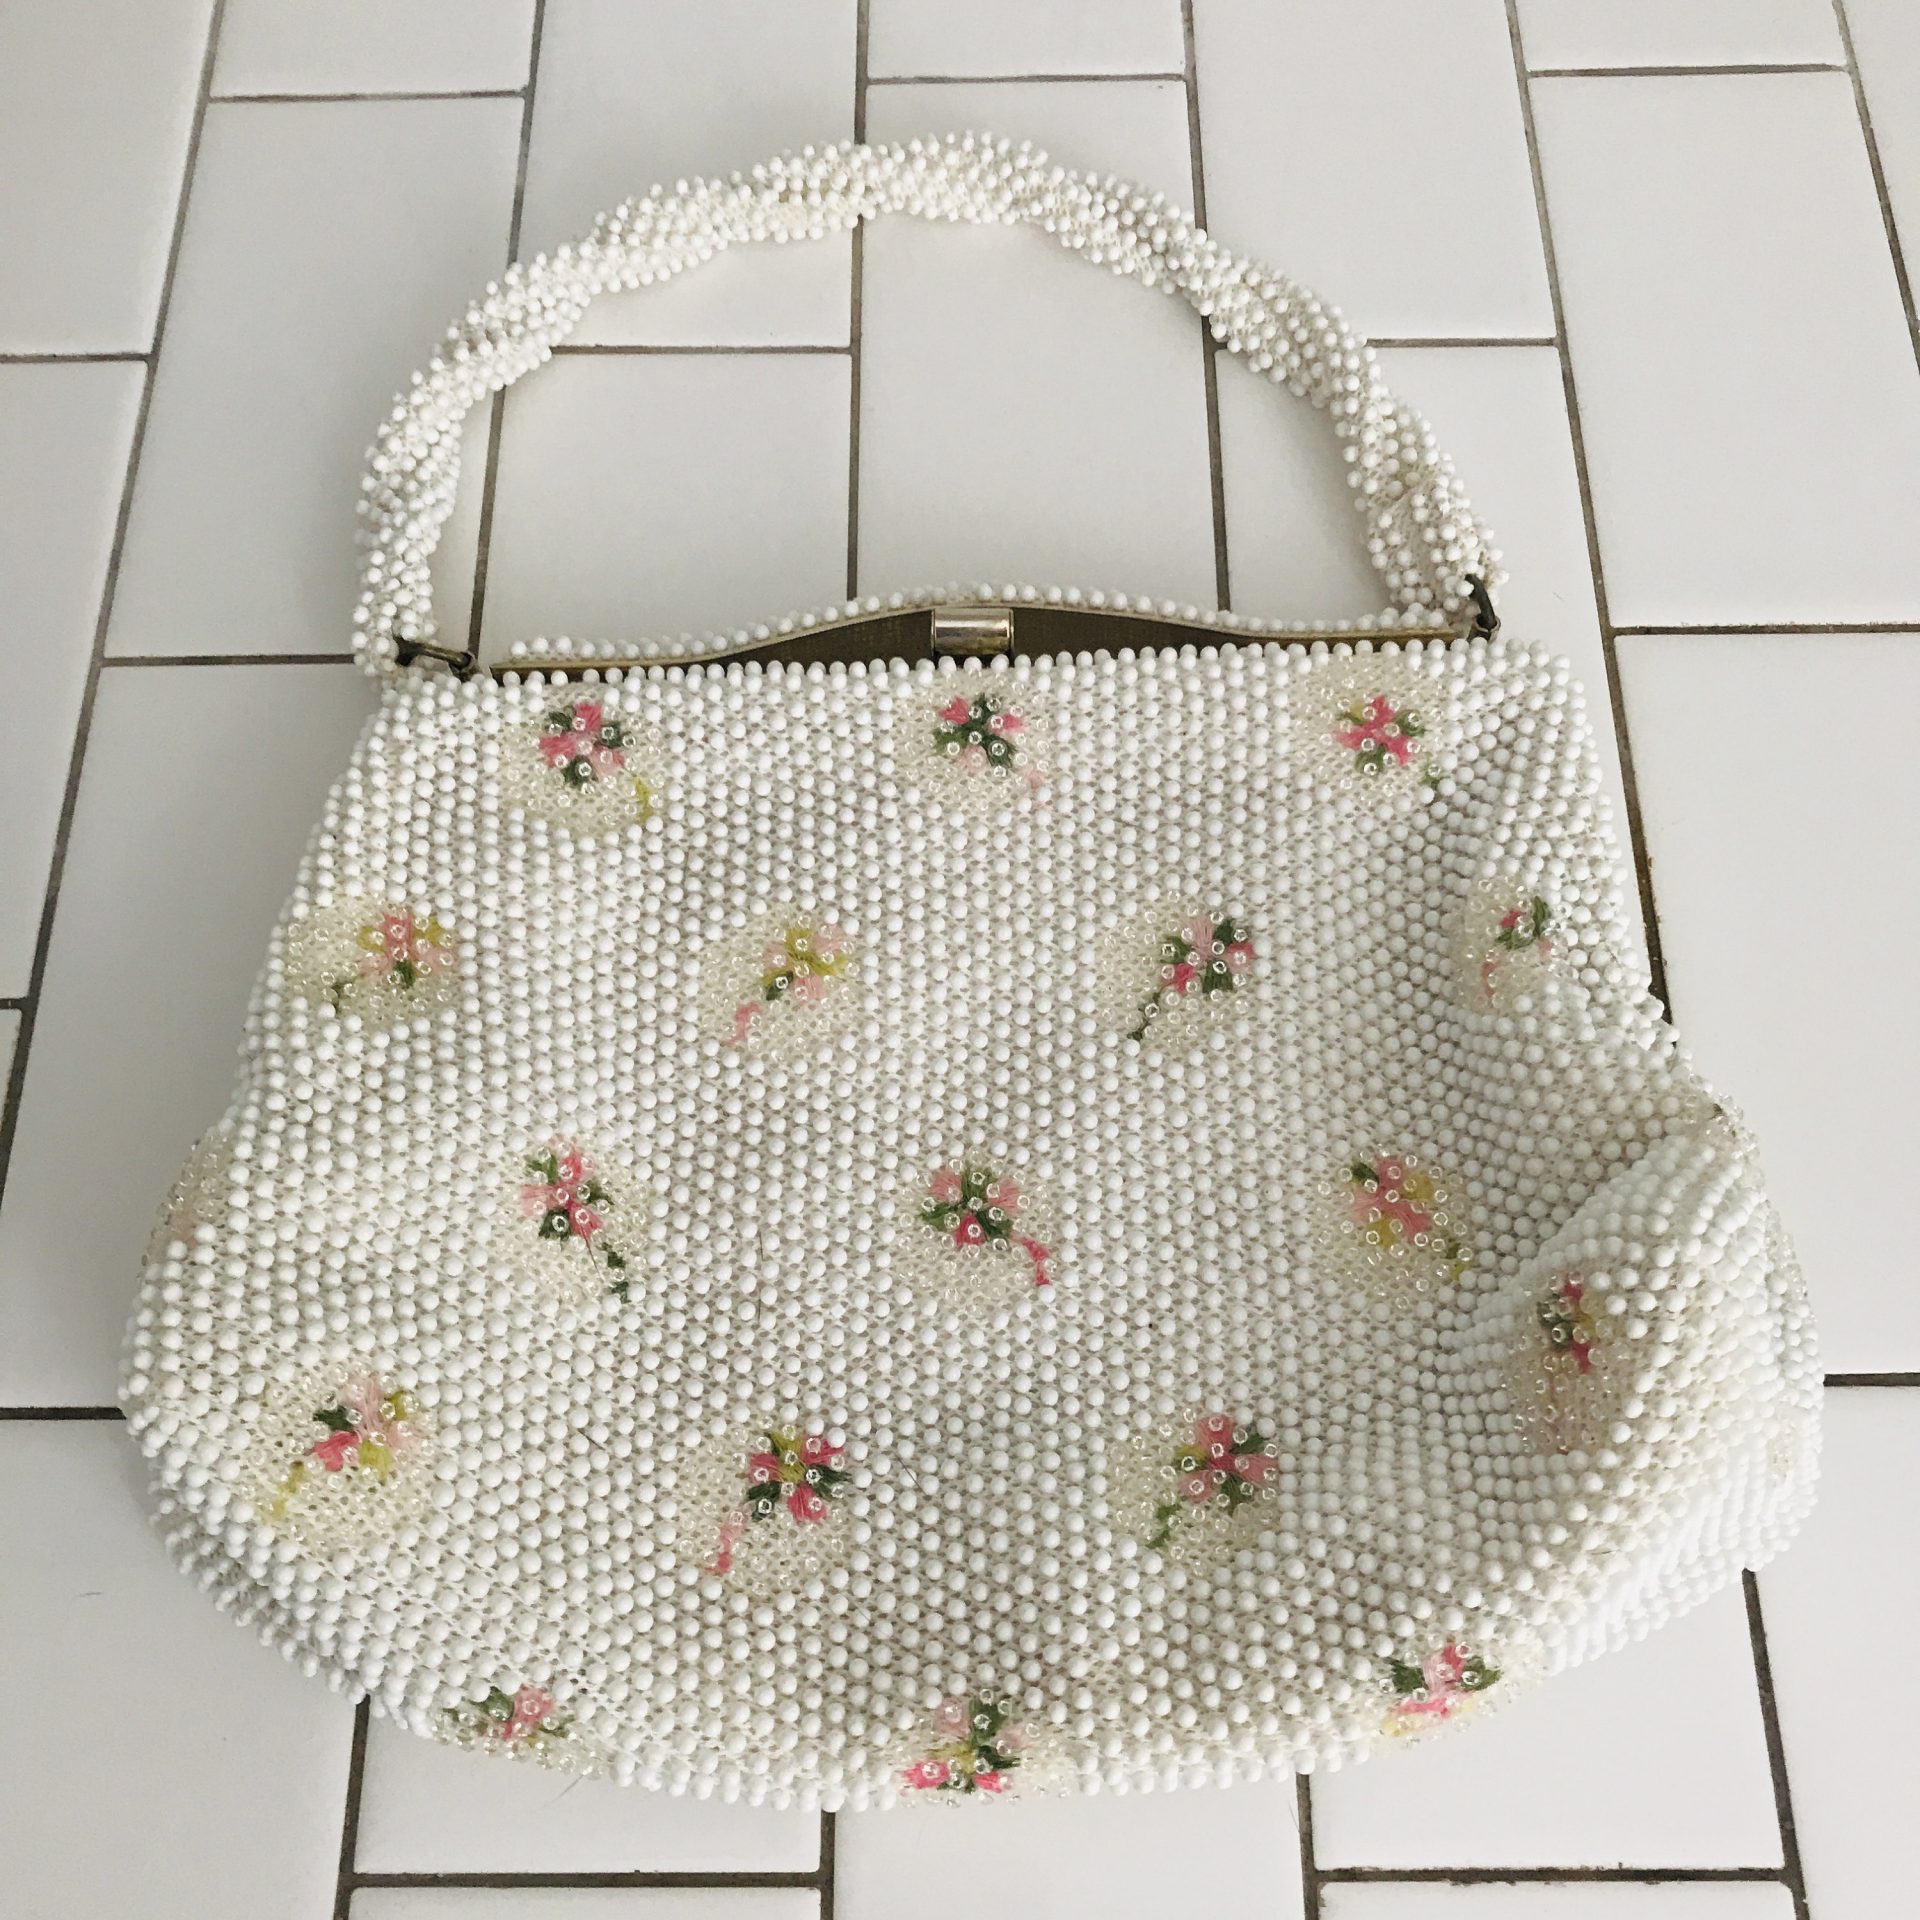 Vintage Lamured Beaded Purse bag White with Pink Flowers 12 x 8